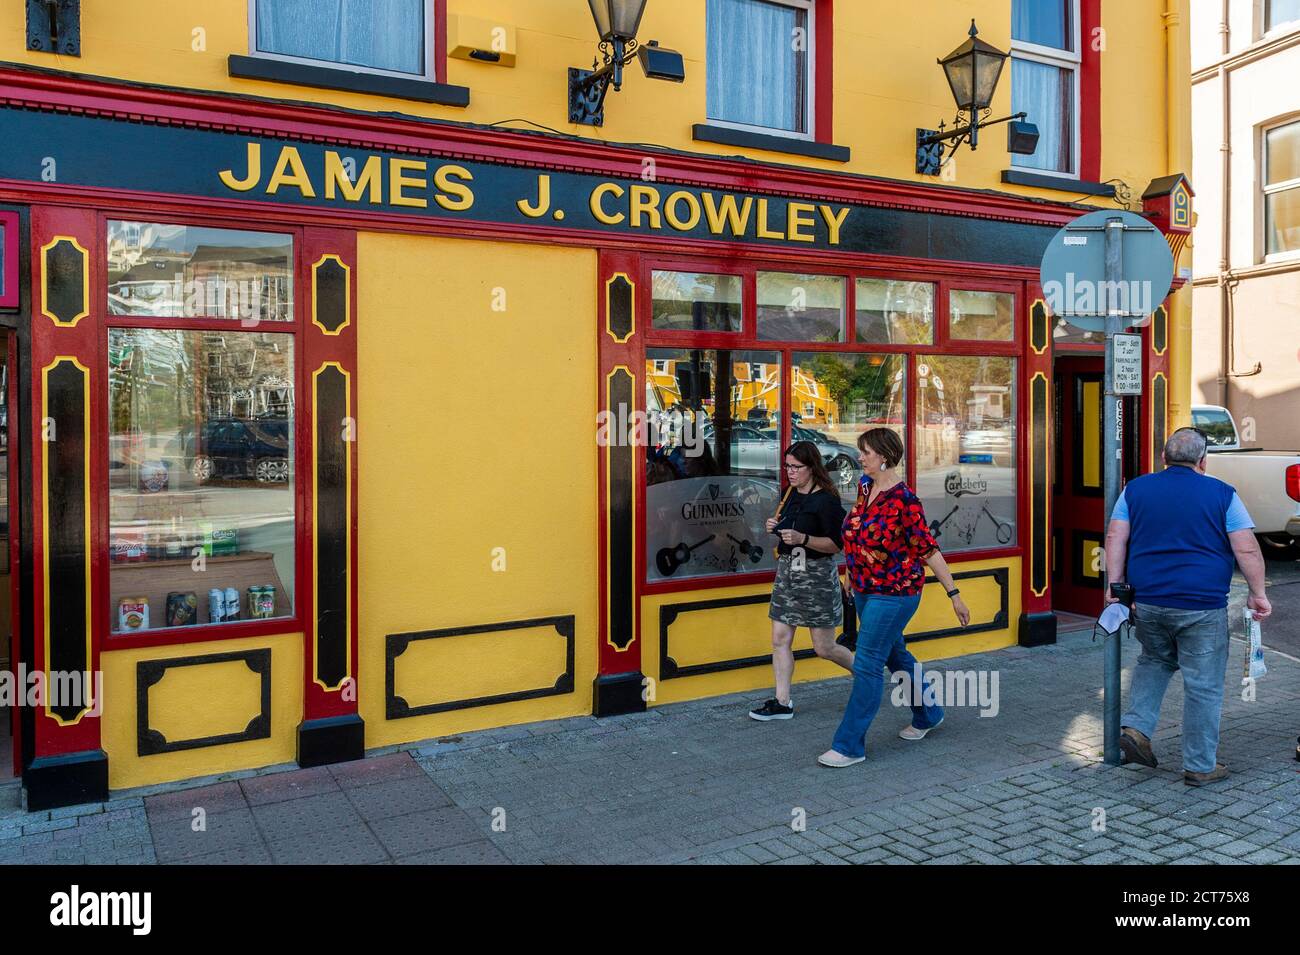 Bantry, West Cork, Ireland. 21st Sep, 2020. Wet Pubs opened in their droves across the country today after the government gave the green light to non-food serving hostelries. JJ Crowley's in Bantry opened early this morning after 190 days closure. Credit: AG News/Alamy Live News Stock Photo